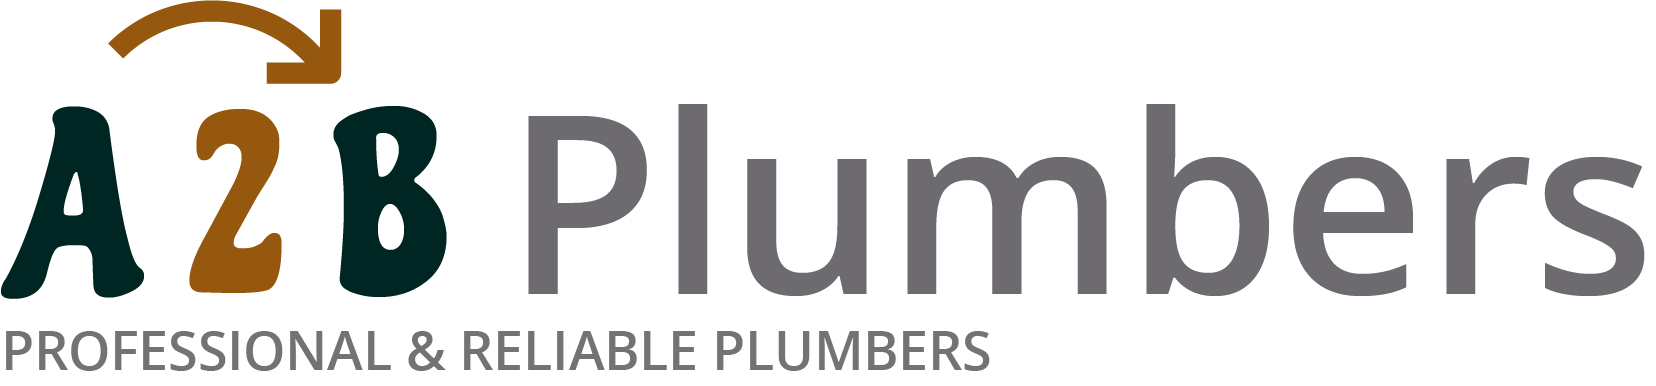 If you need a boiler installed, a radiator repaired or a leaking tap fixed, call us now - we provide services for properties in Sutton On Sea and the local area.